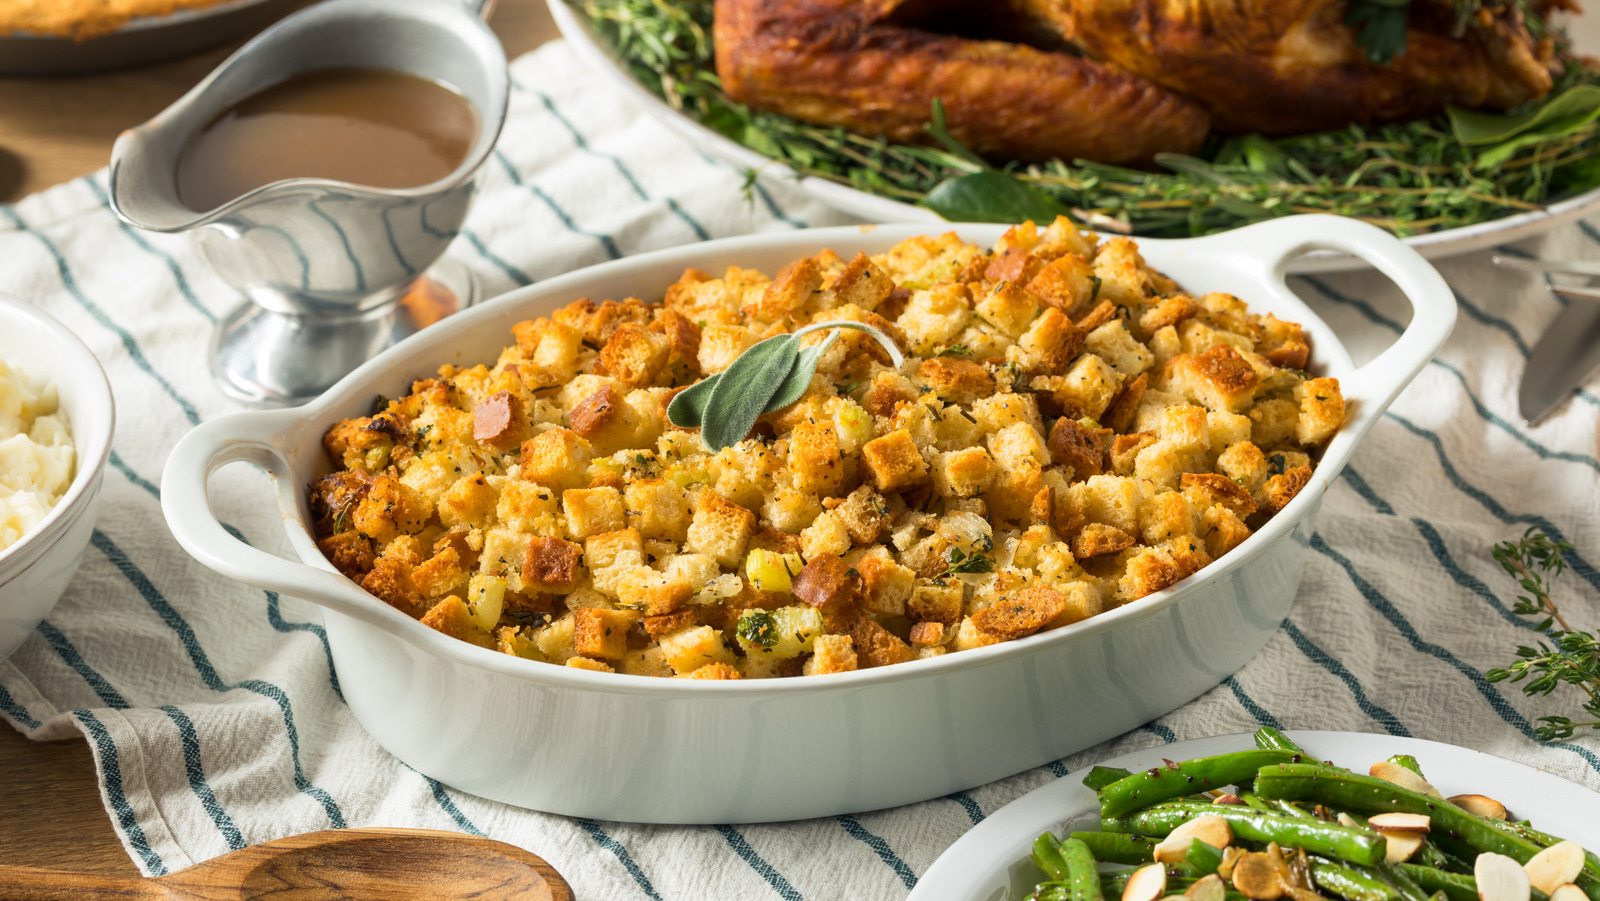 Herb Oil Is The Secret Ingredient To Flavorful Dairy-Free Stuffing